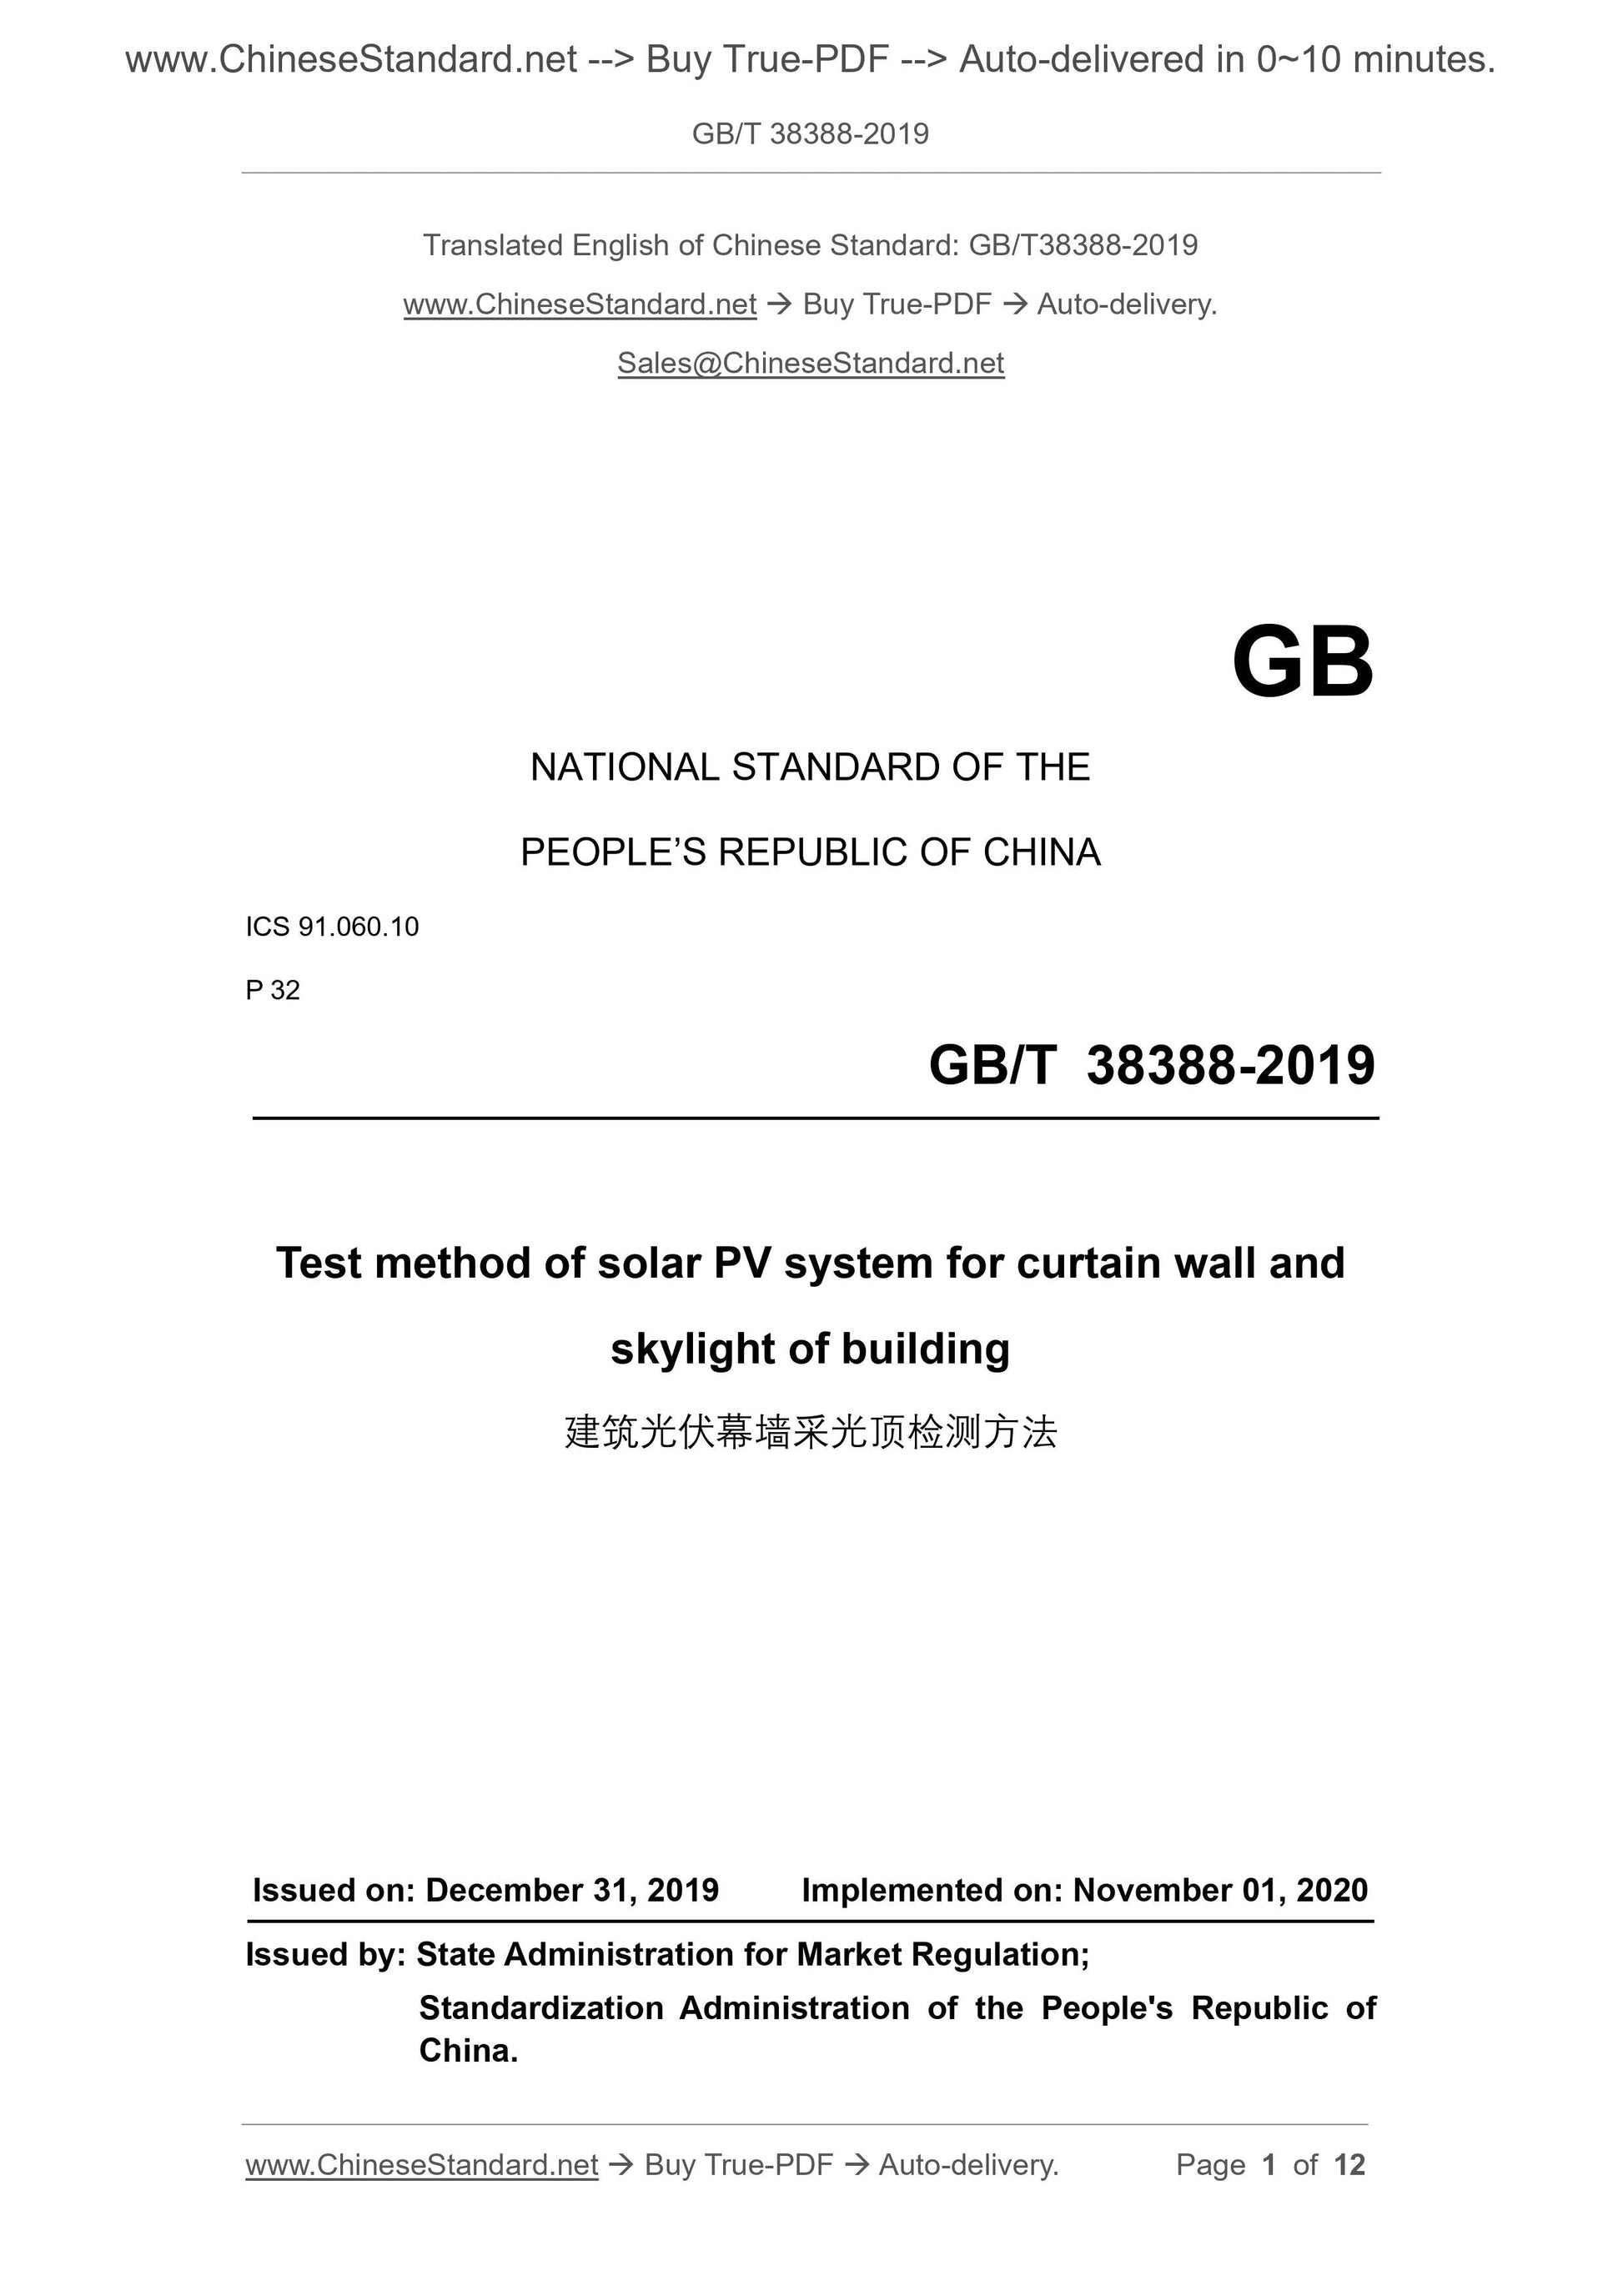 GB/T 38388-2019 Page 1